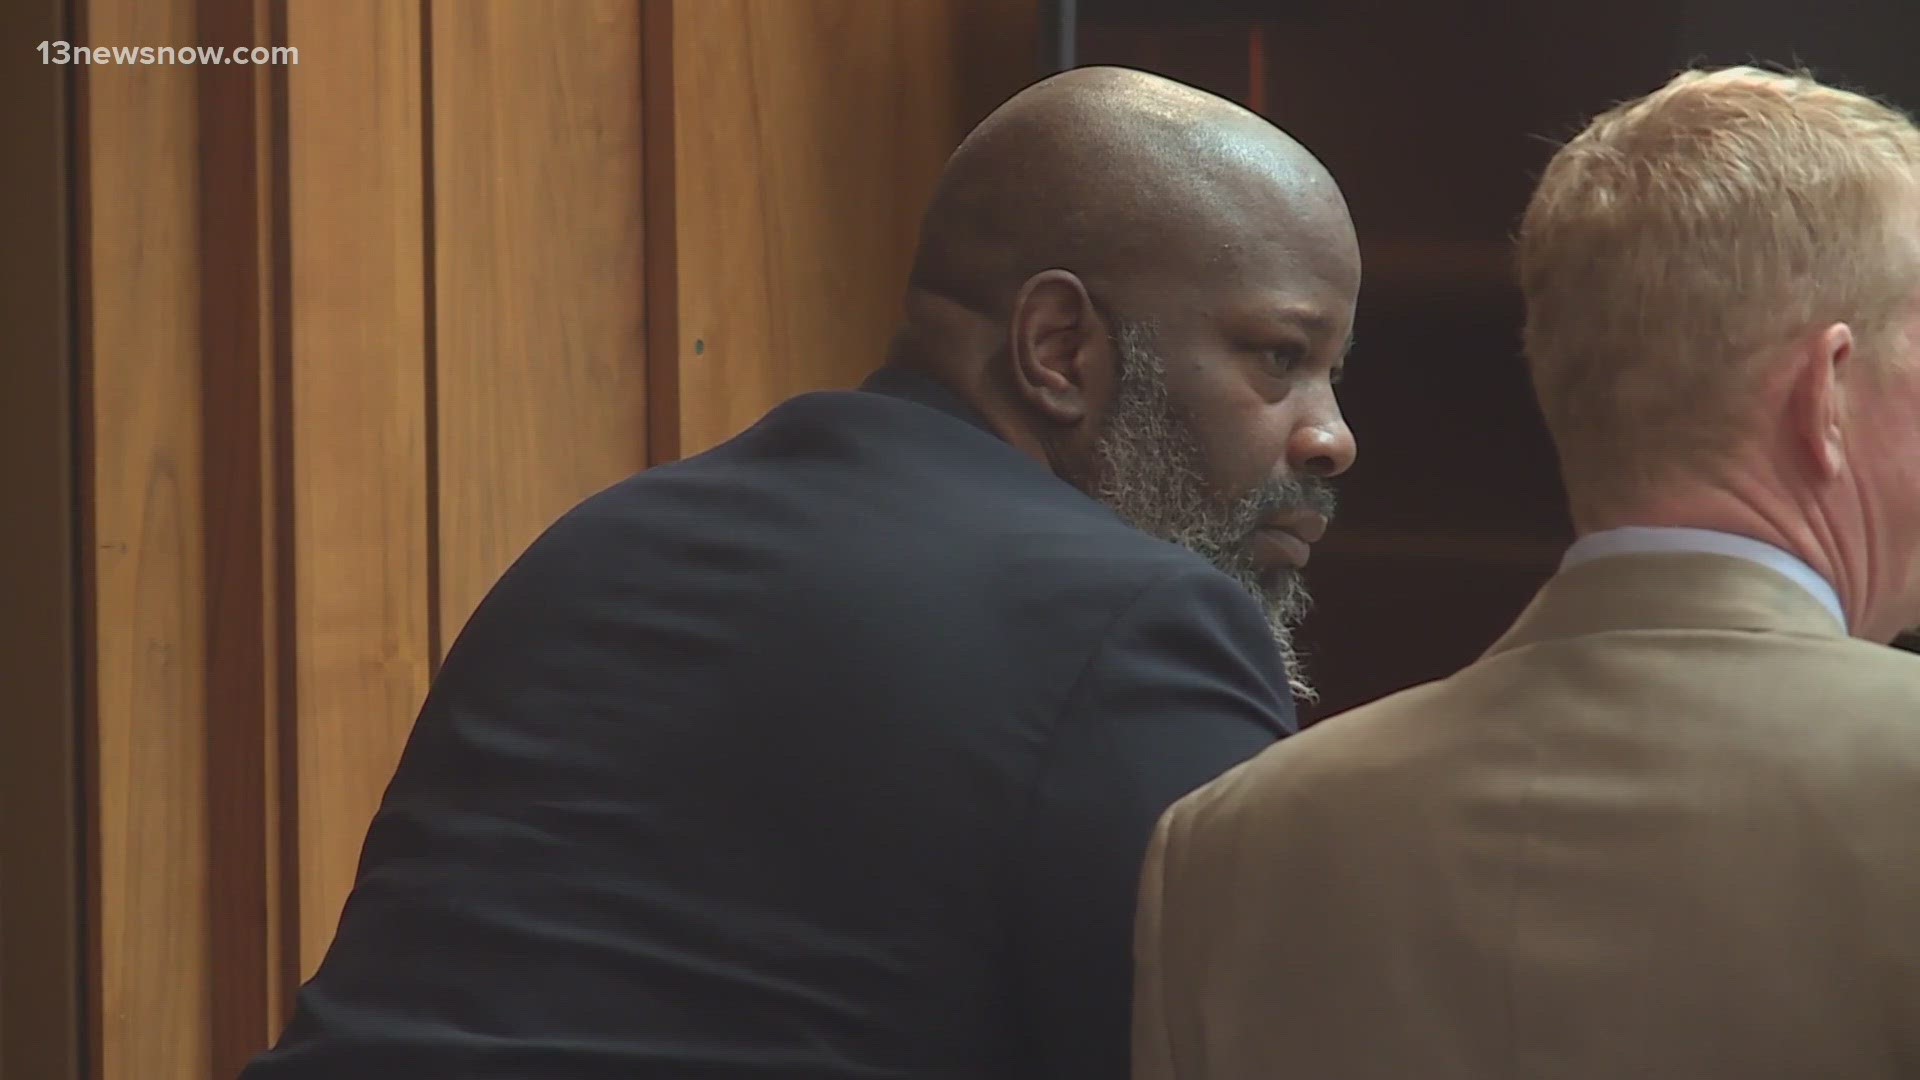 The second week of Adrian Lewis' murder trial started Monday.